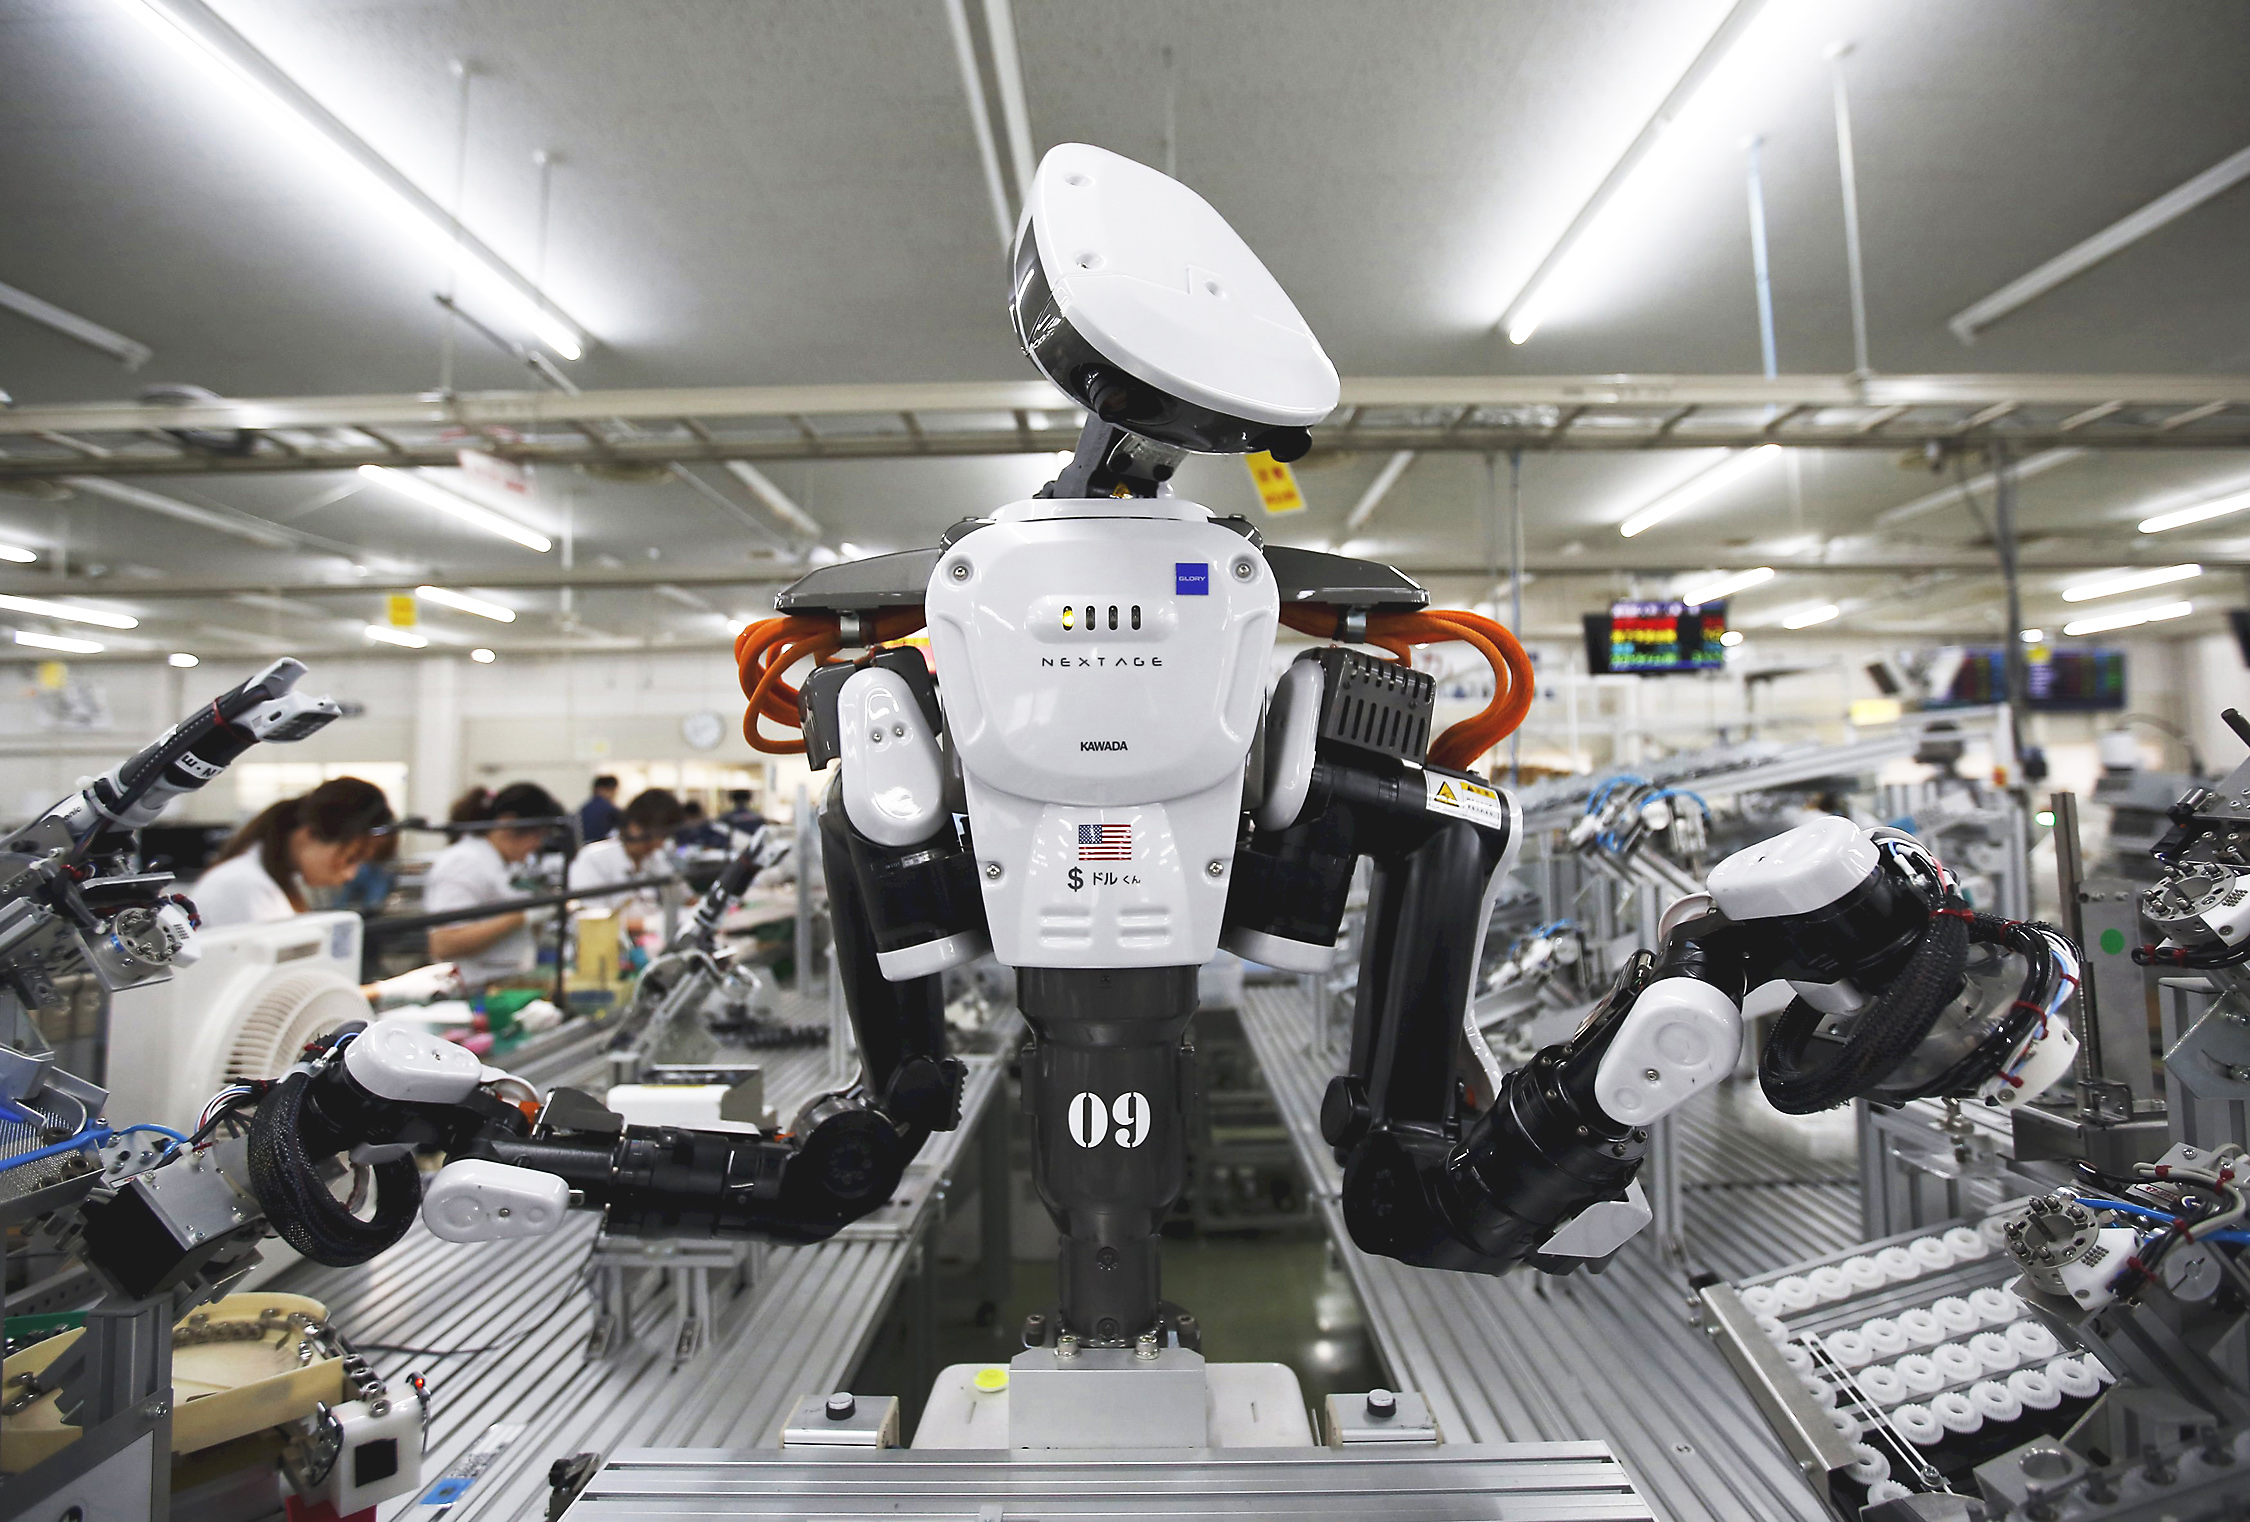 Japan using robots as fix for labor, growth woes | The Japan Times